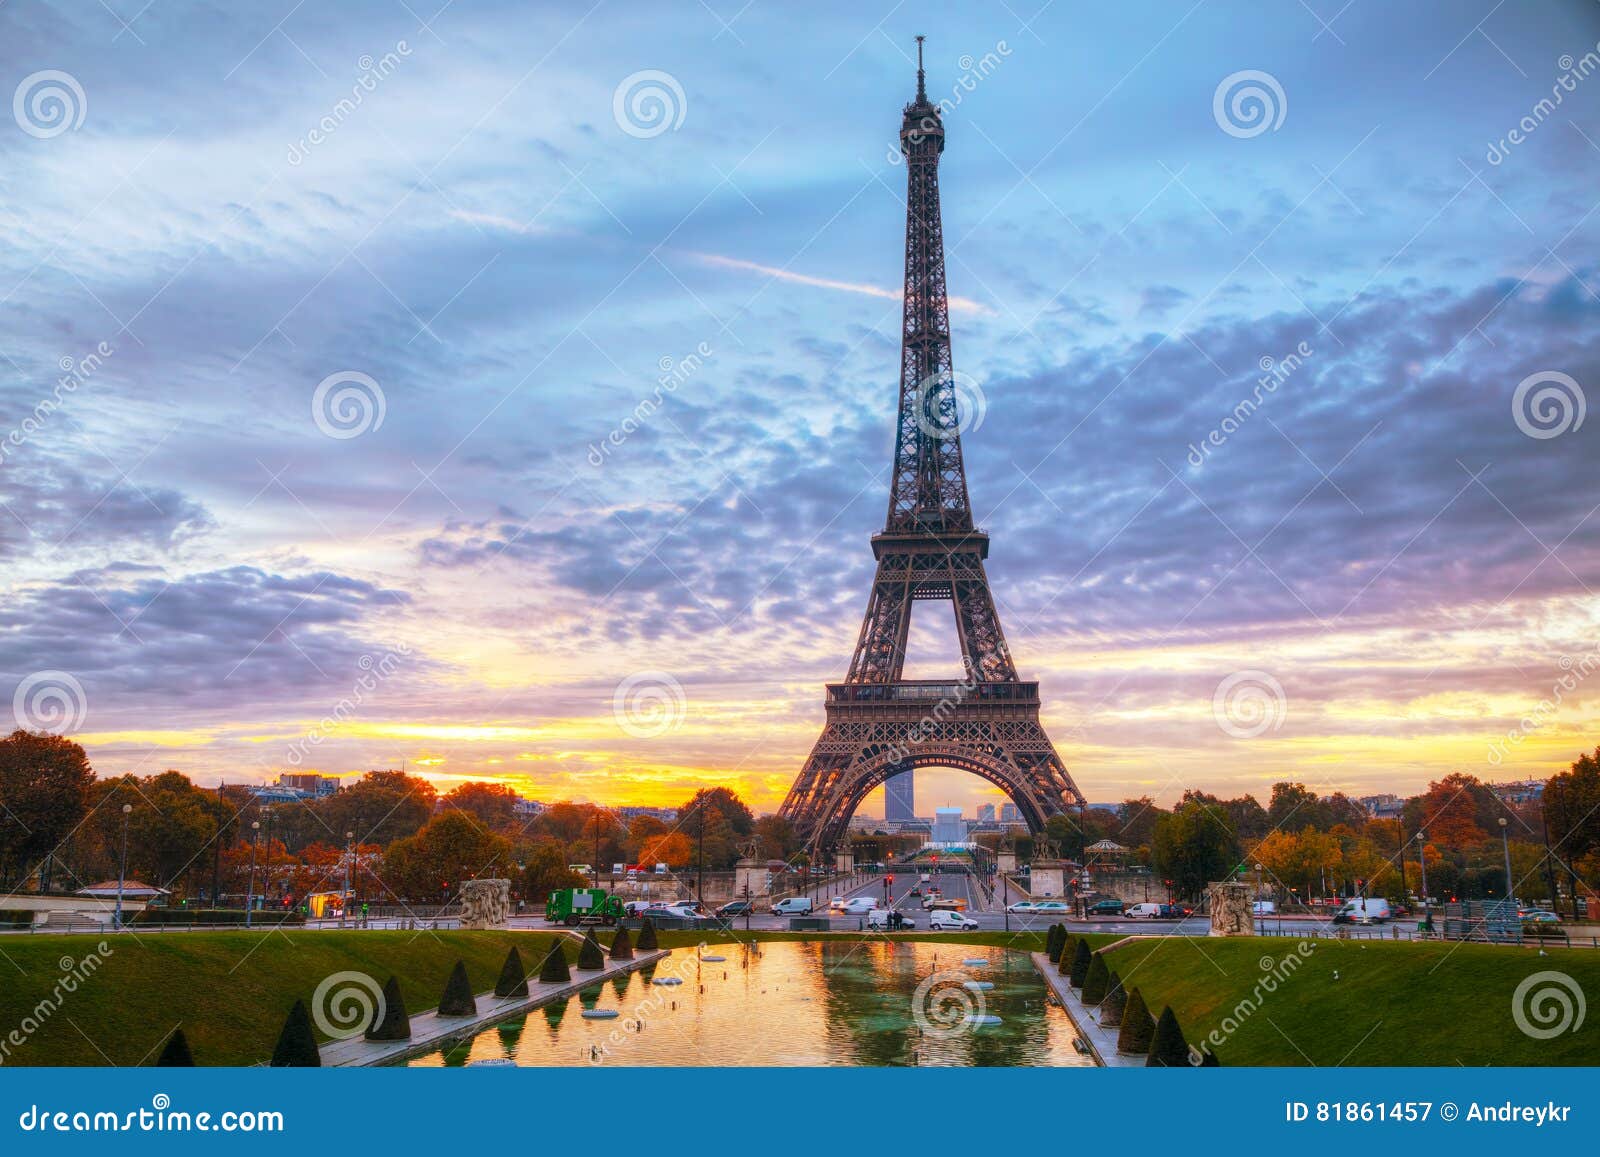 cityscape with the eiffel tower in paris, france